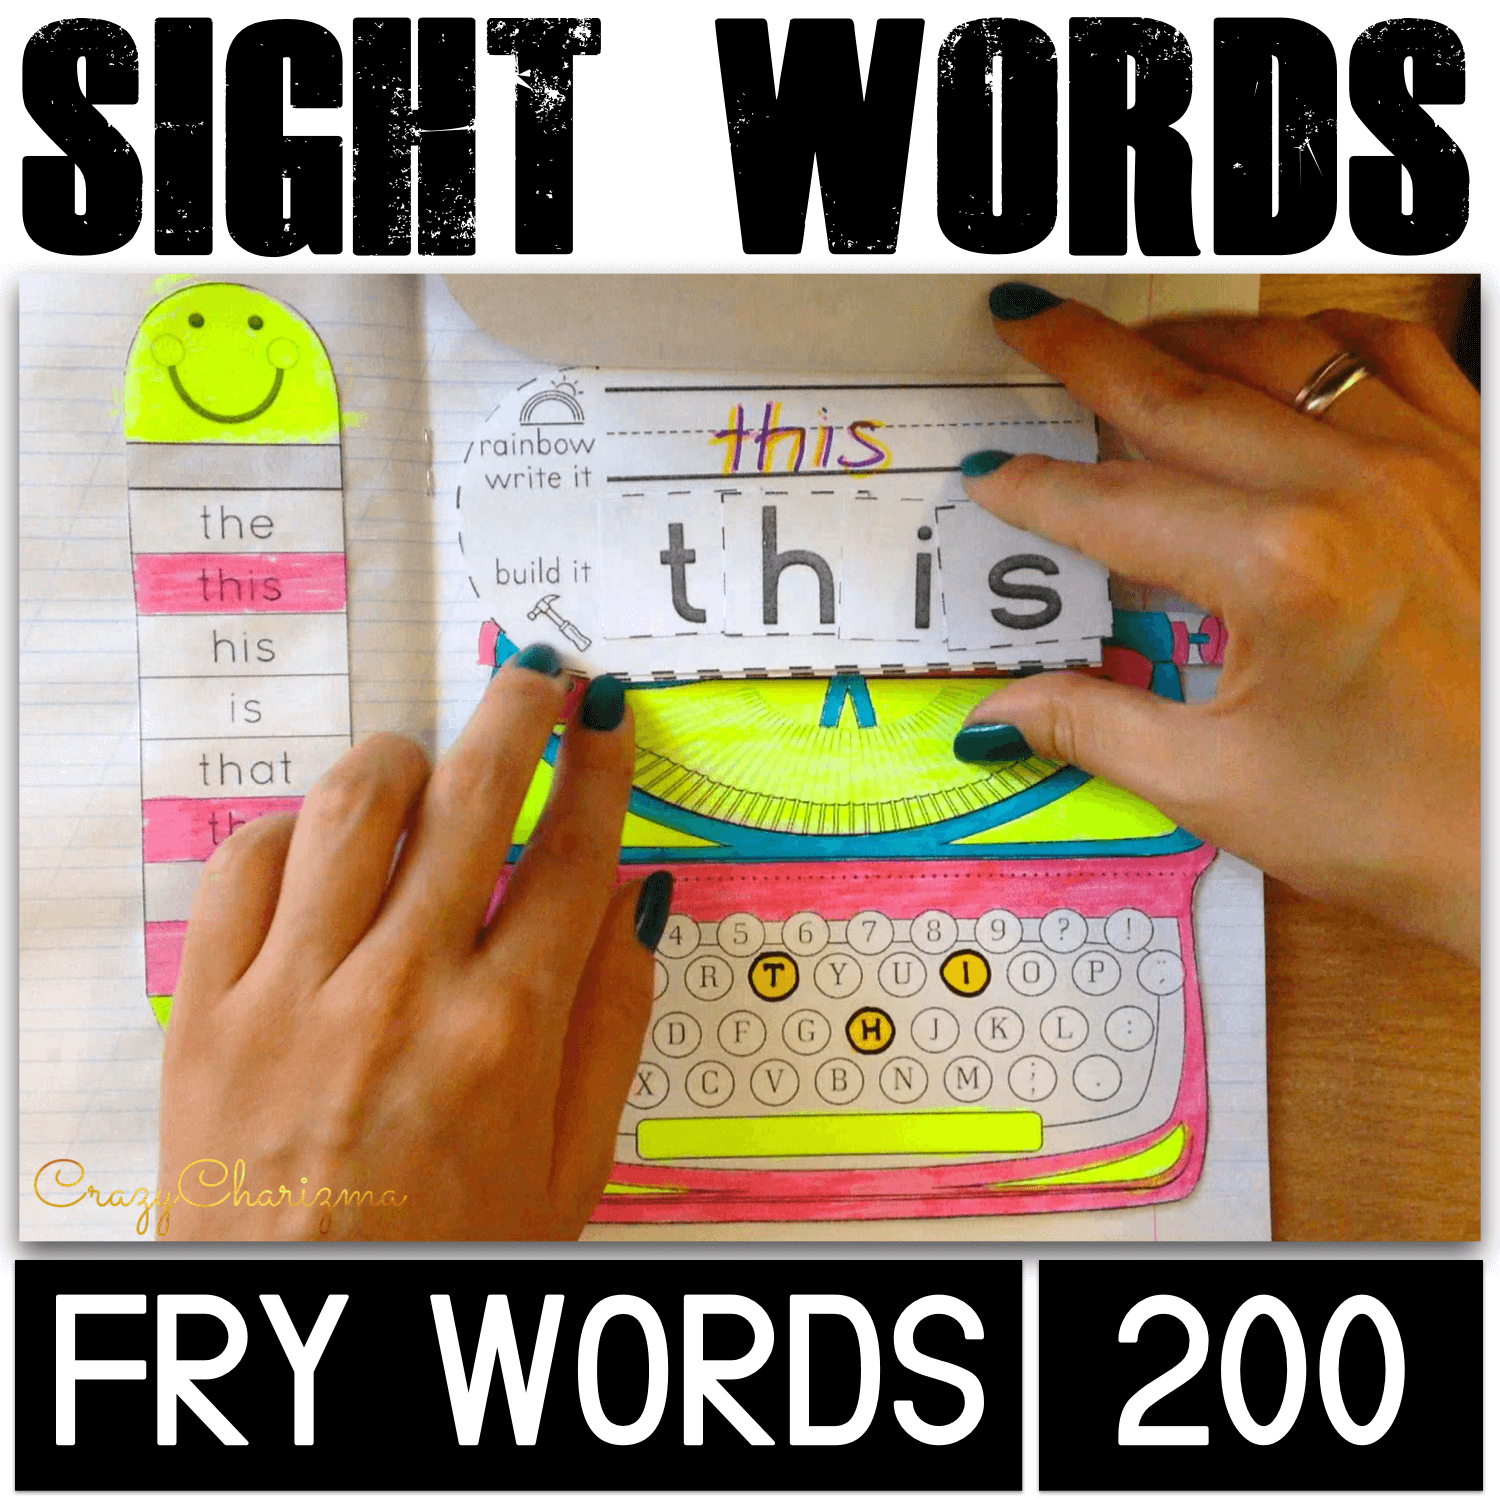 Let's teach Fry sight words in a fun way! The packet has practical, step-by-step exercises to help kindergarten and First Grade children learn to sight-read, write, and practice 200 essential high-frequency words.